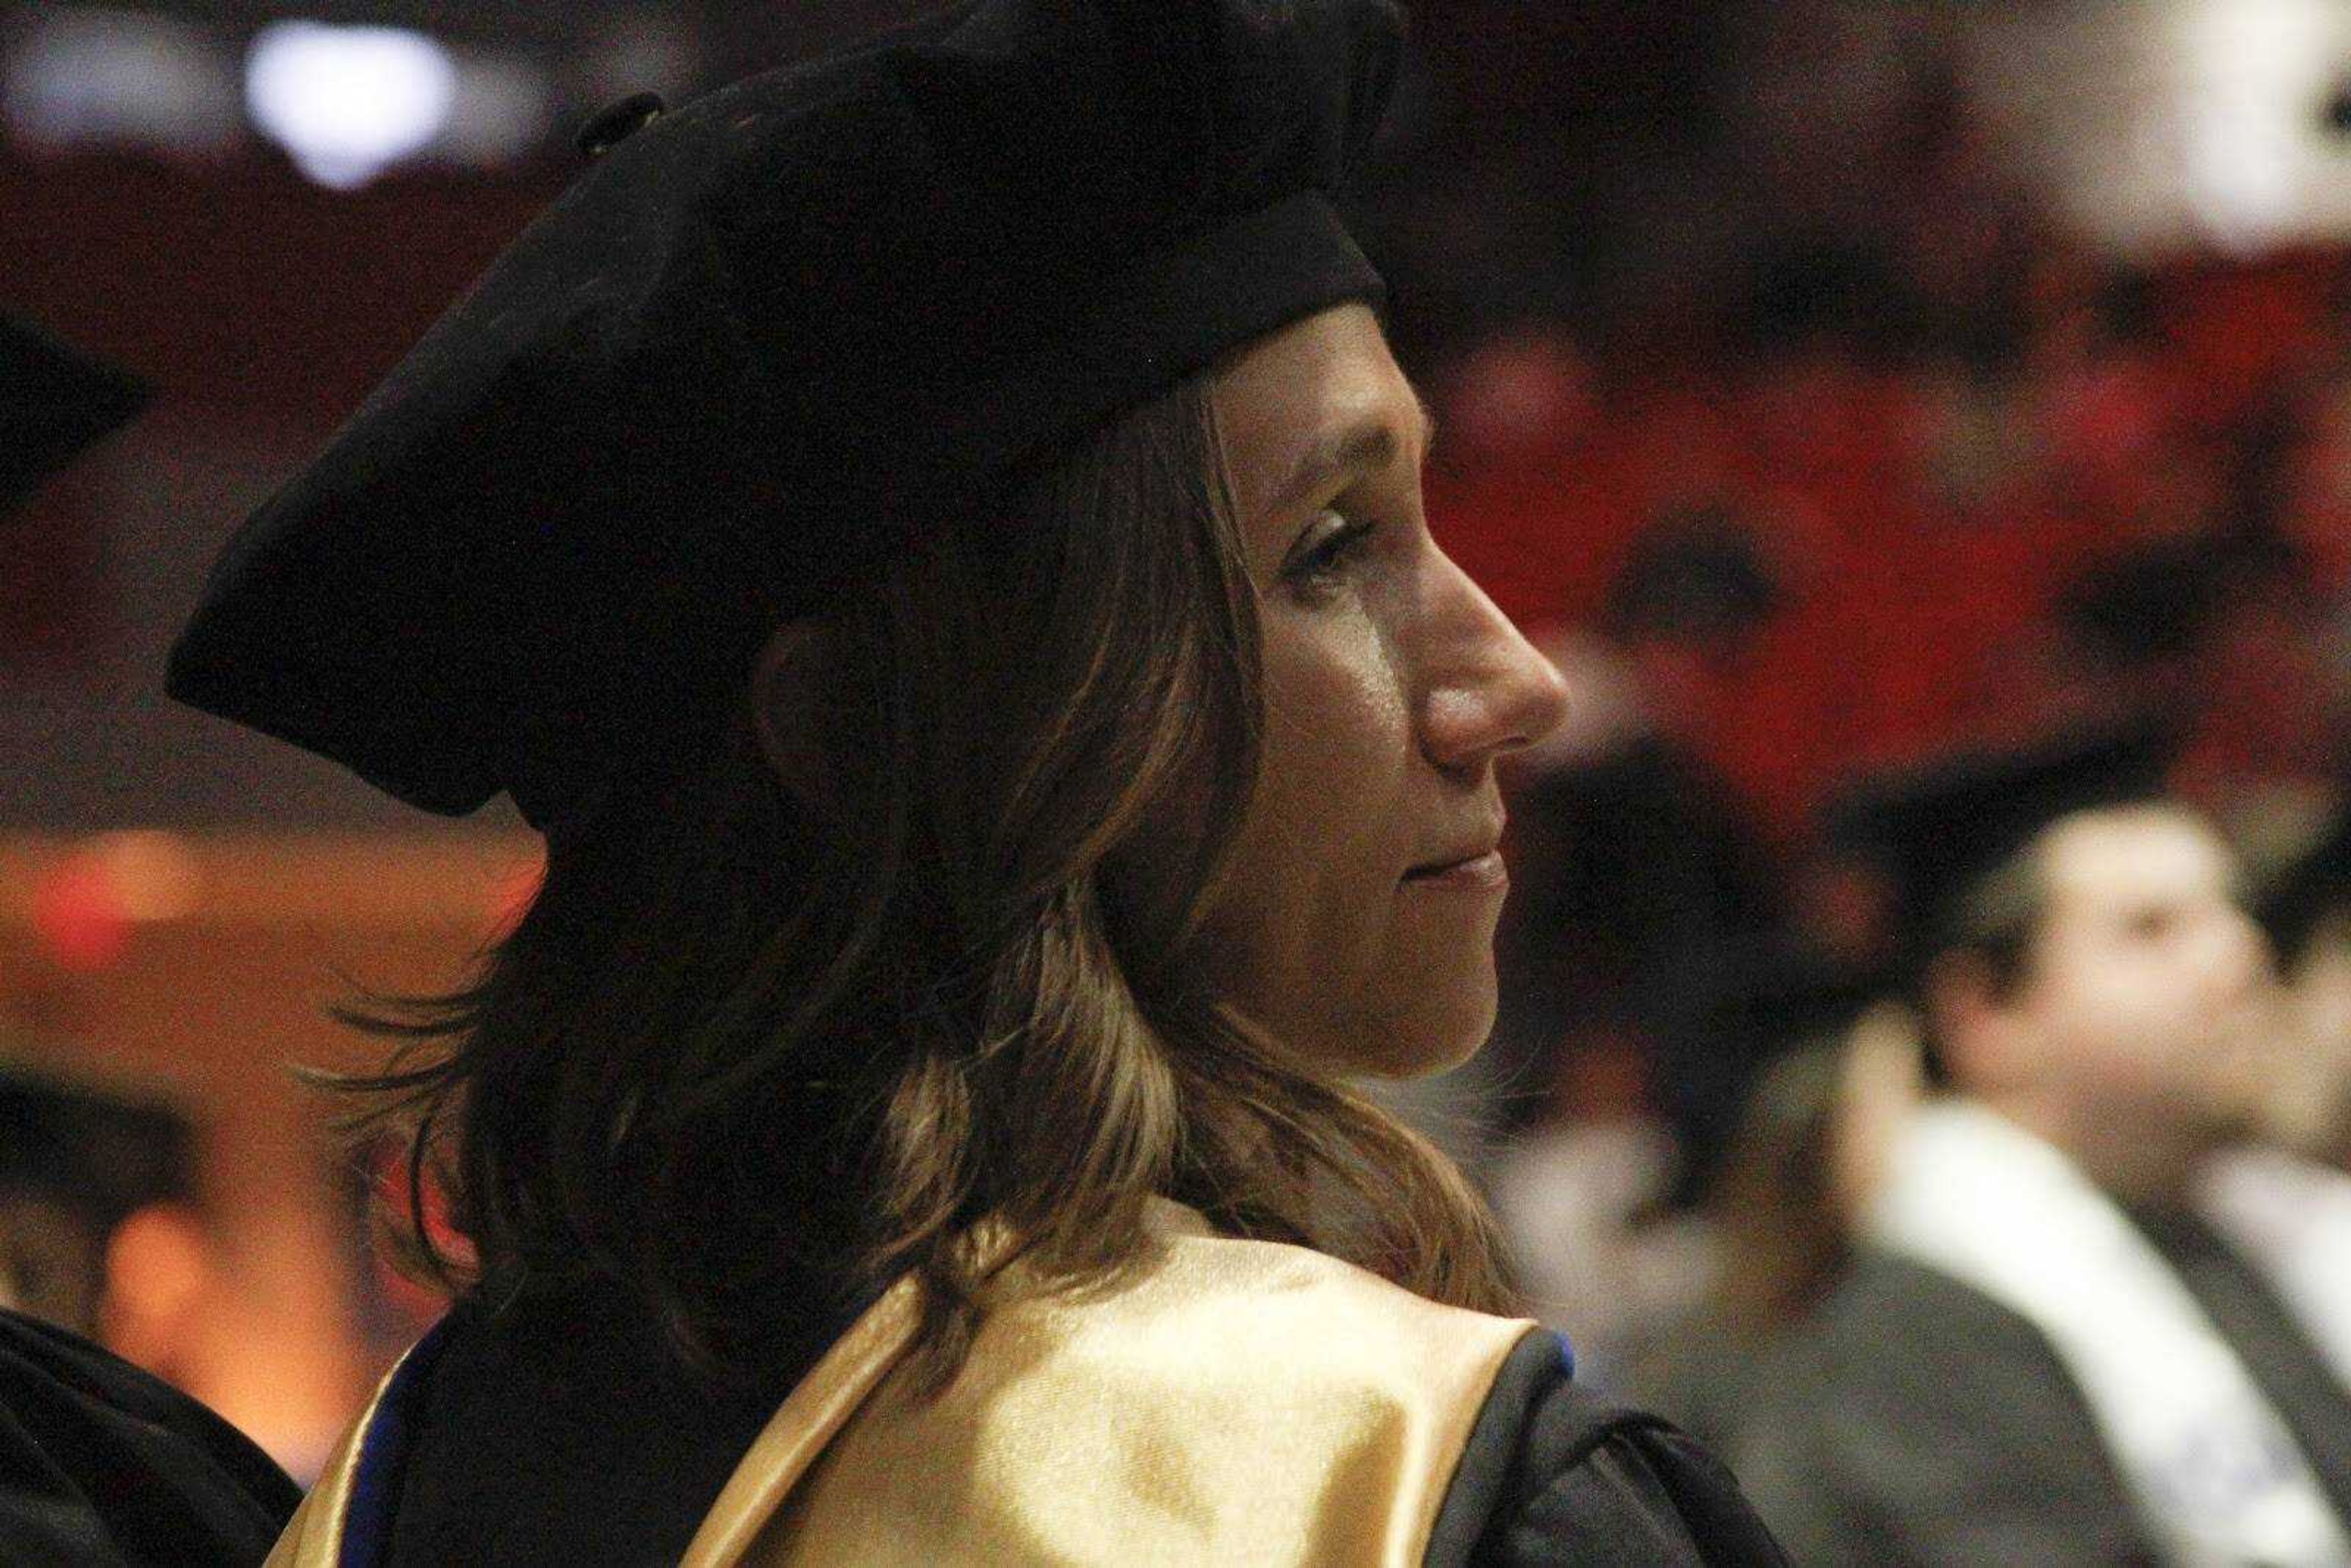 A faculty member looks toward the stage at Southeast Missouri State University's winter commencement ceremony on Saturday, Dec. 14, 2019, at the Show Me Center in Cape Girardeau.